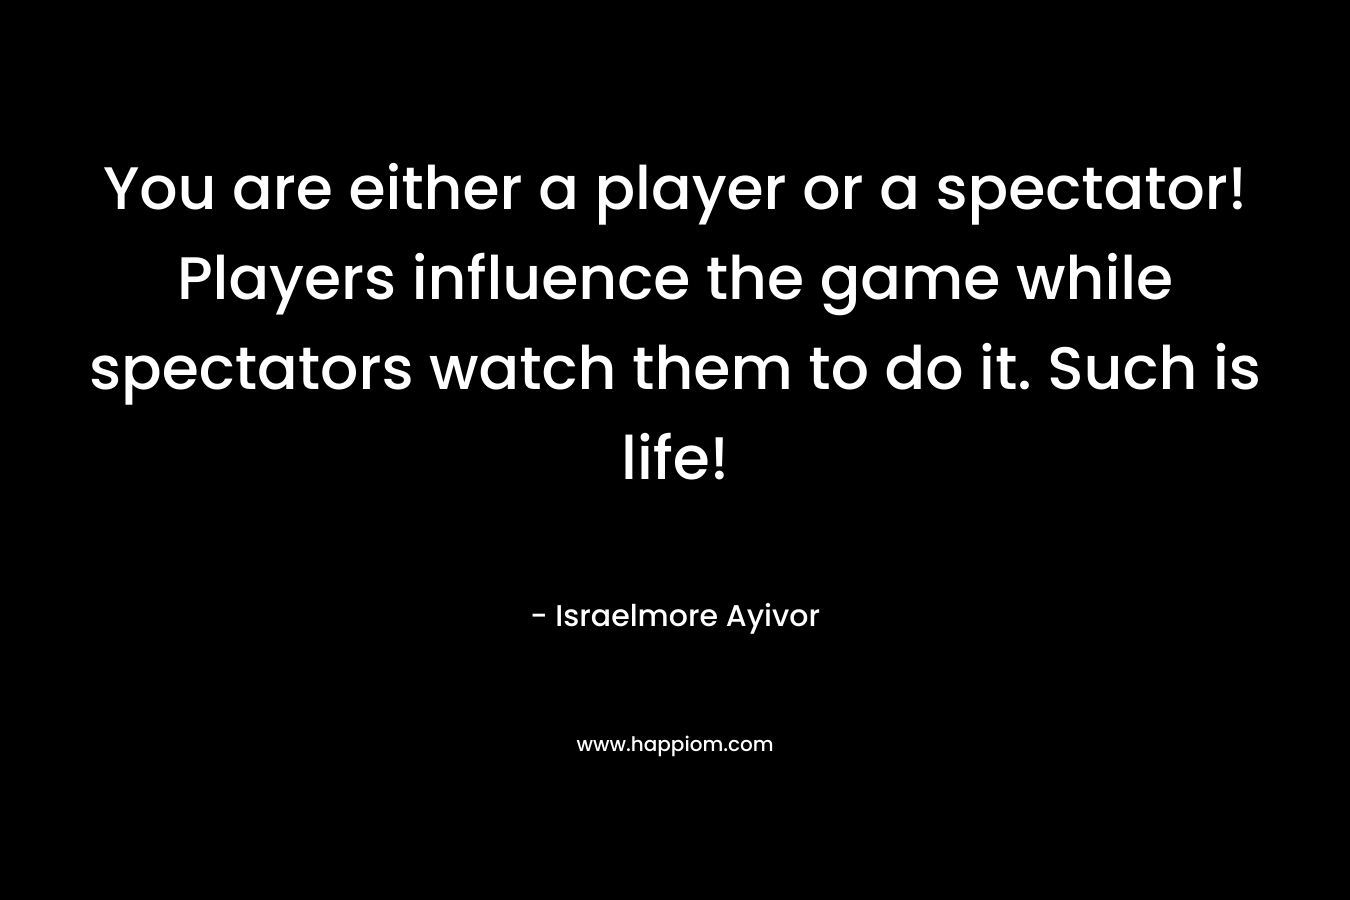 You are either a player or a spectator! Players influence the game while spectators watch them to do it. Such is life!